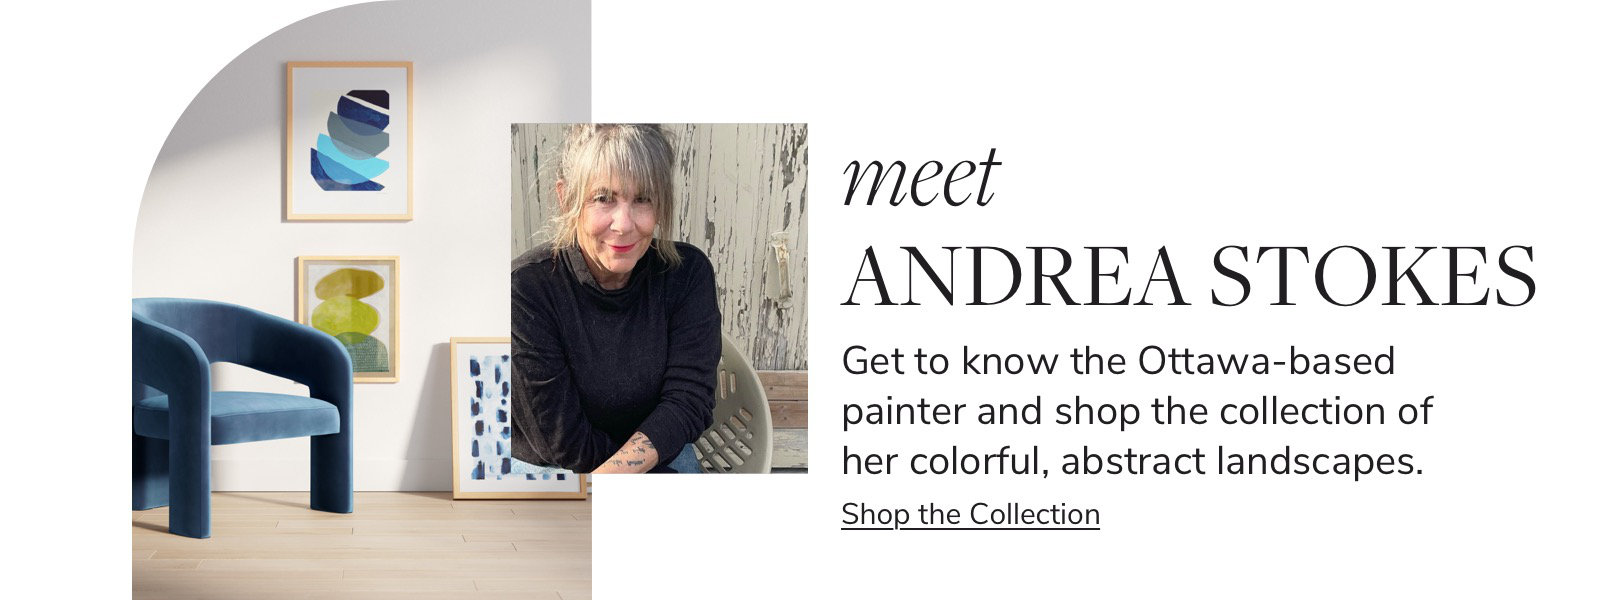 Get to know the painter, Andrea Stokes and shop the collection of her colorful, abstract landscapes.